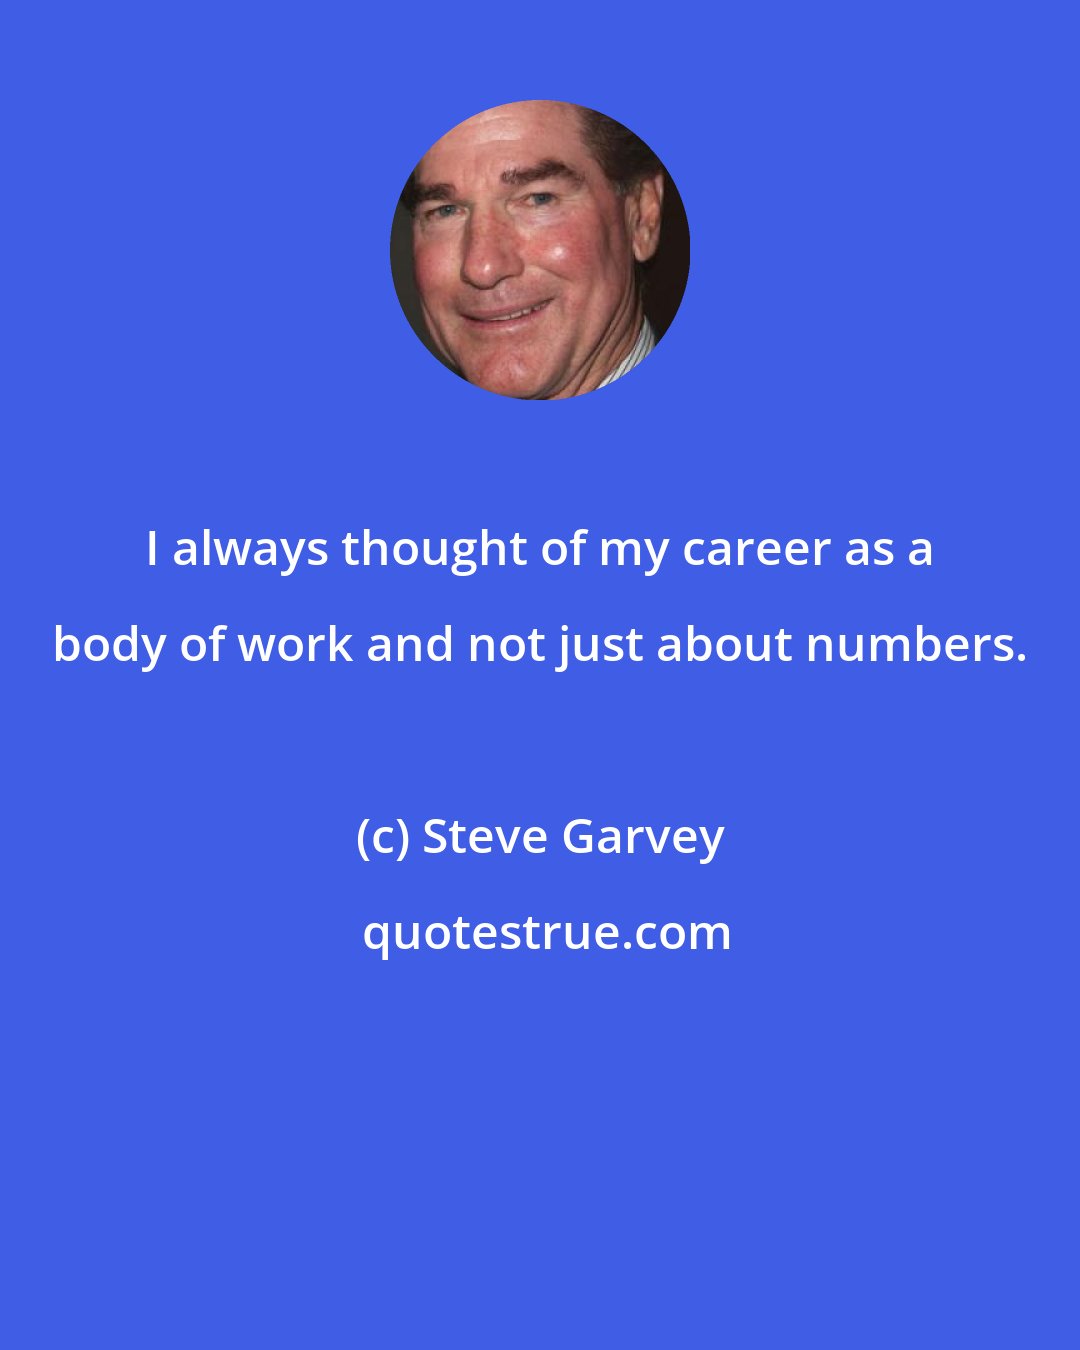 Steve Garvey: I always thought of my career as a body of work and not just about numbers.